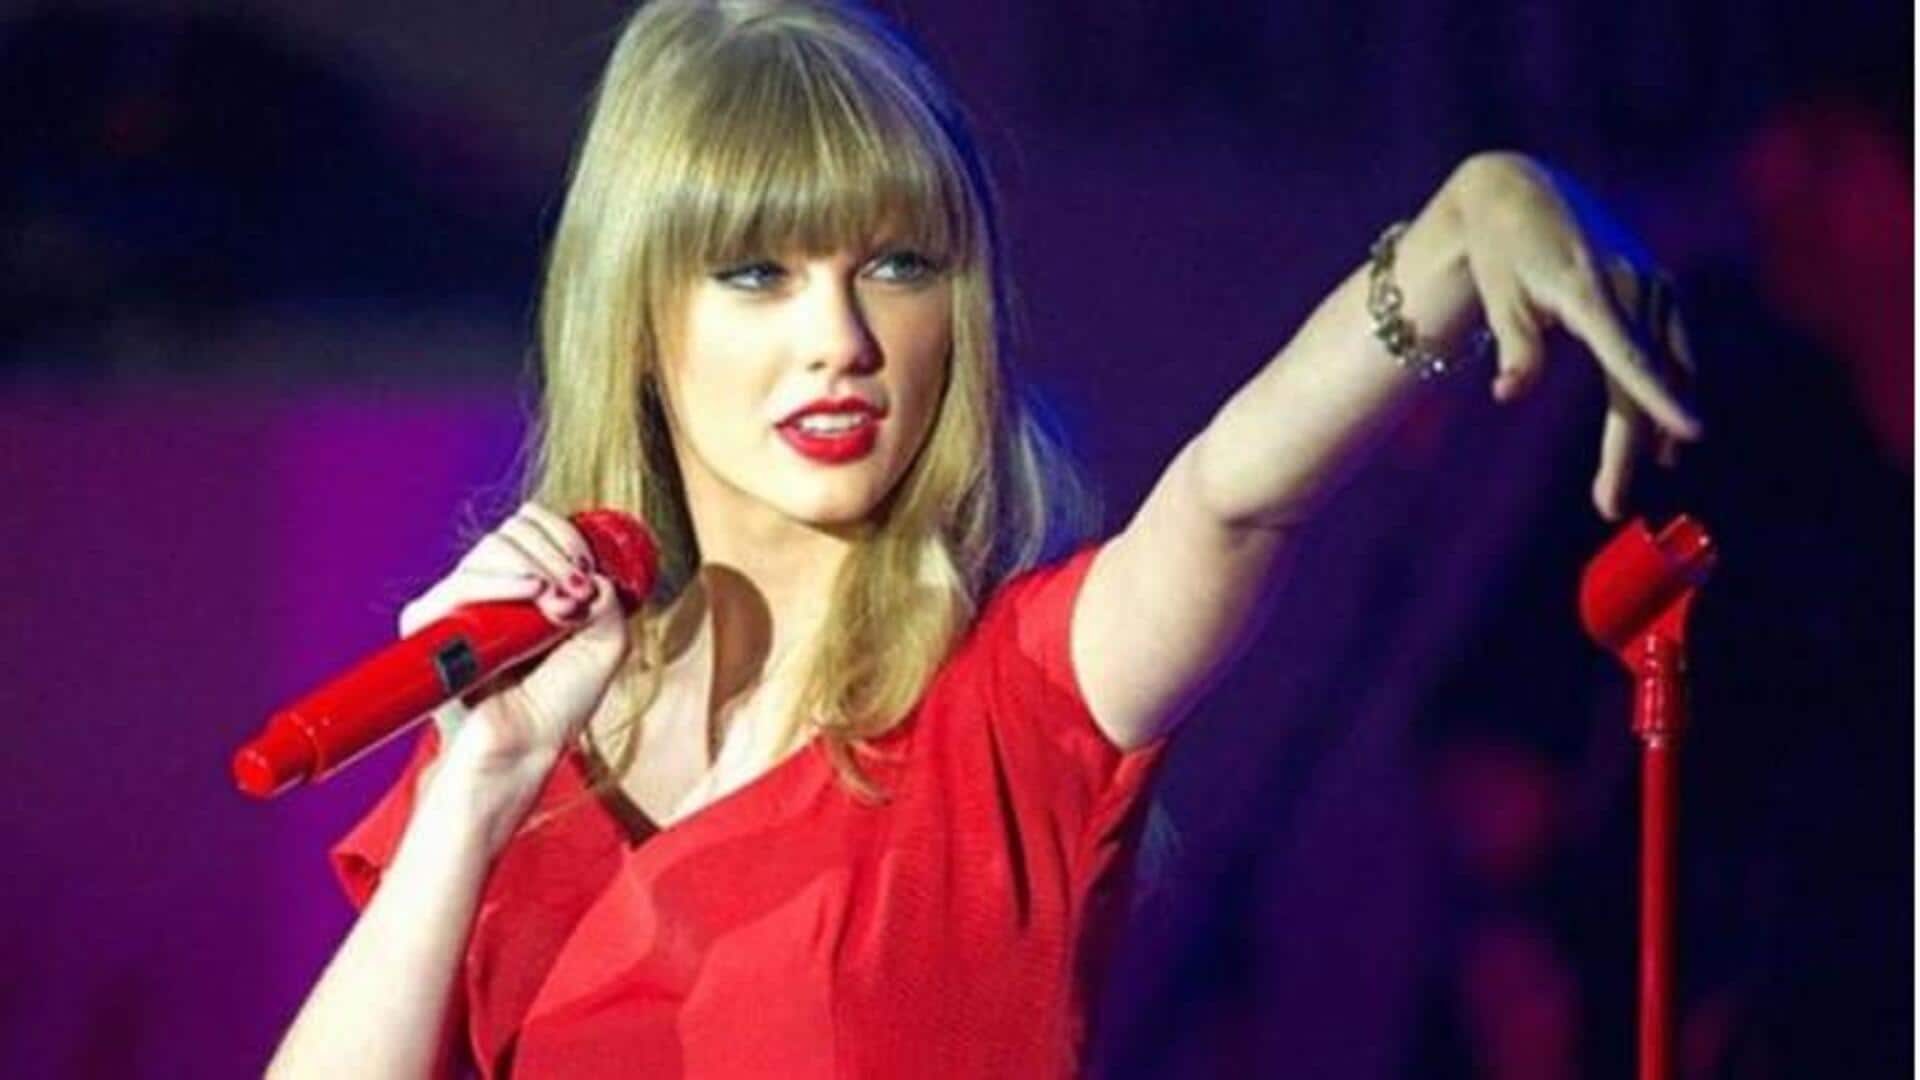 Taylor Swift's accomplishments: City named after her, Australian academic symposium 